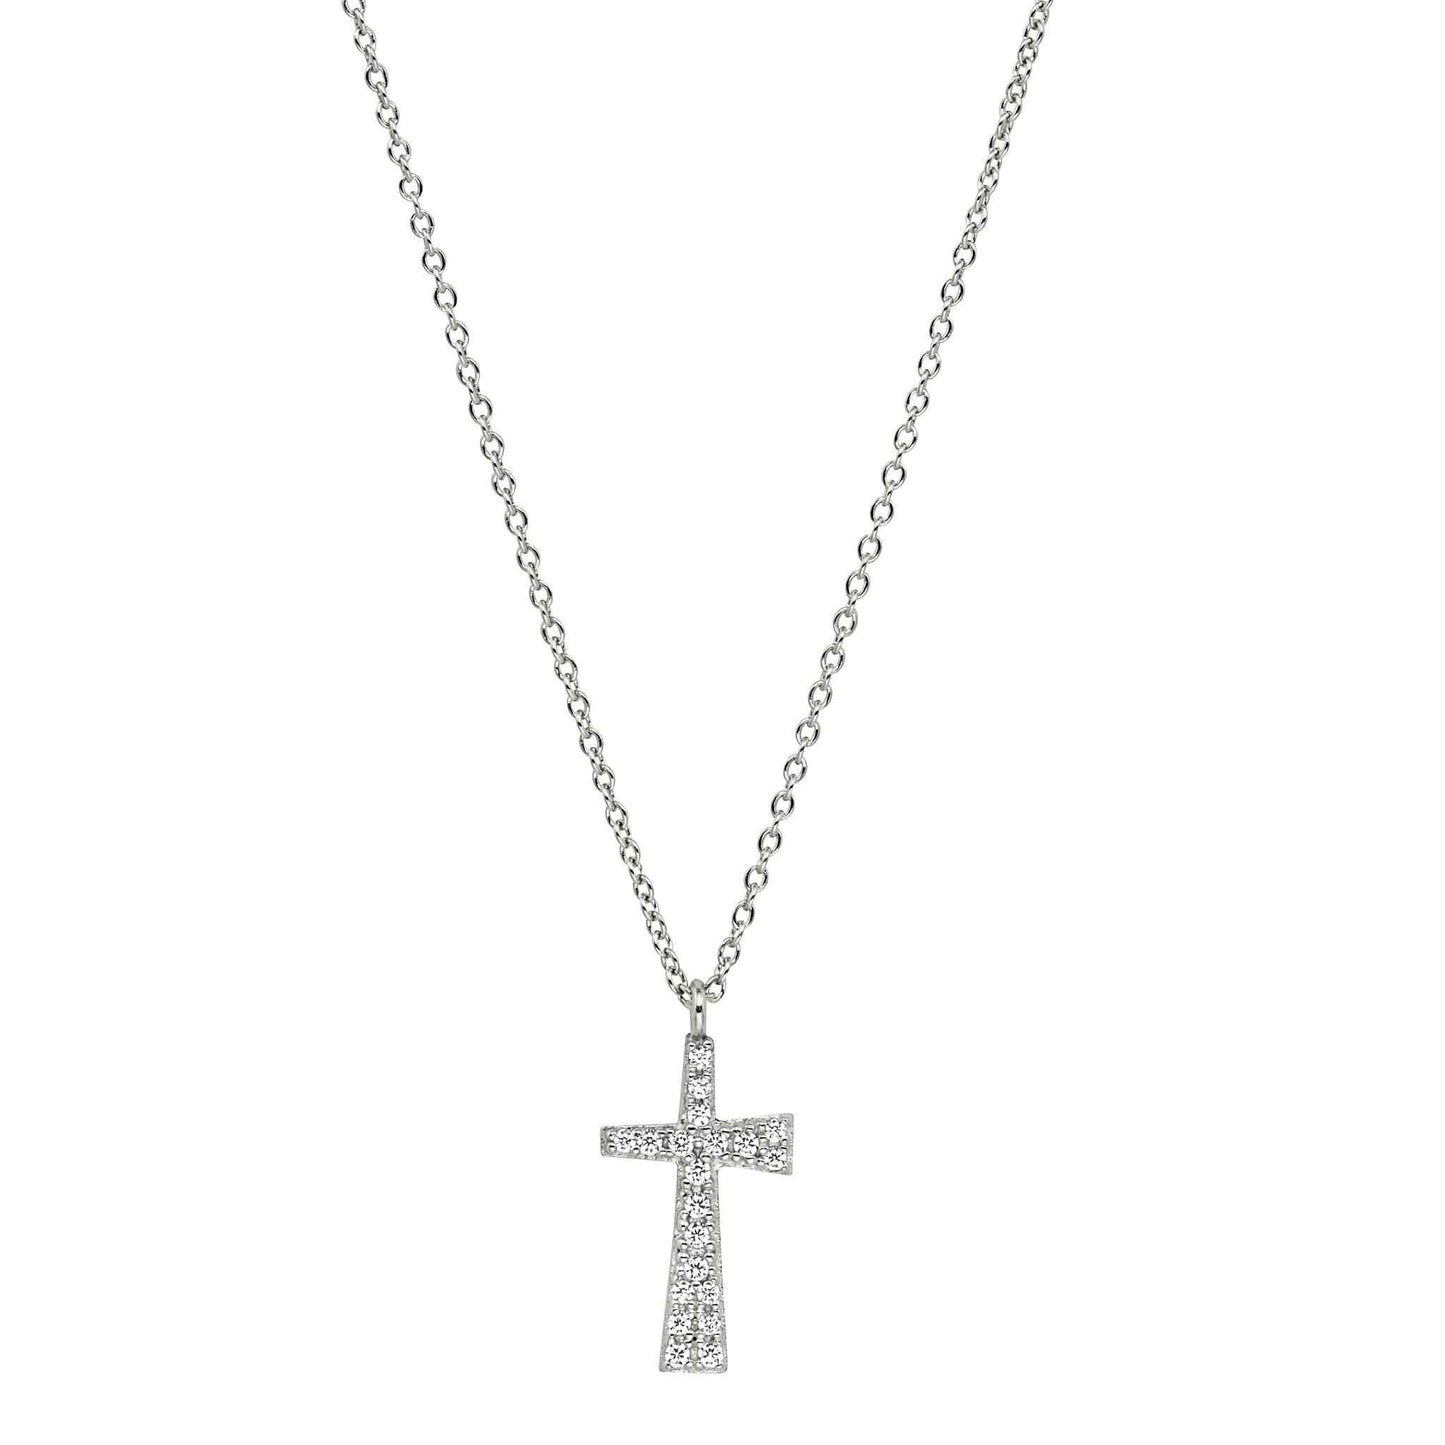 A tapered cross necklace with simulated diamonds displayed on a neutral white background.